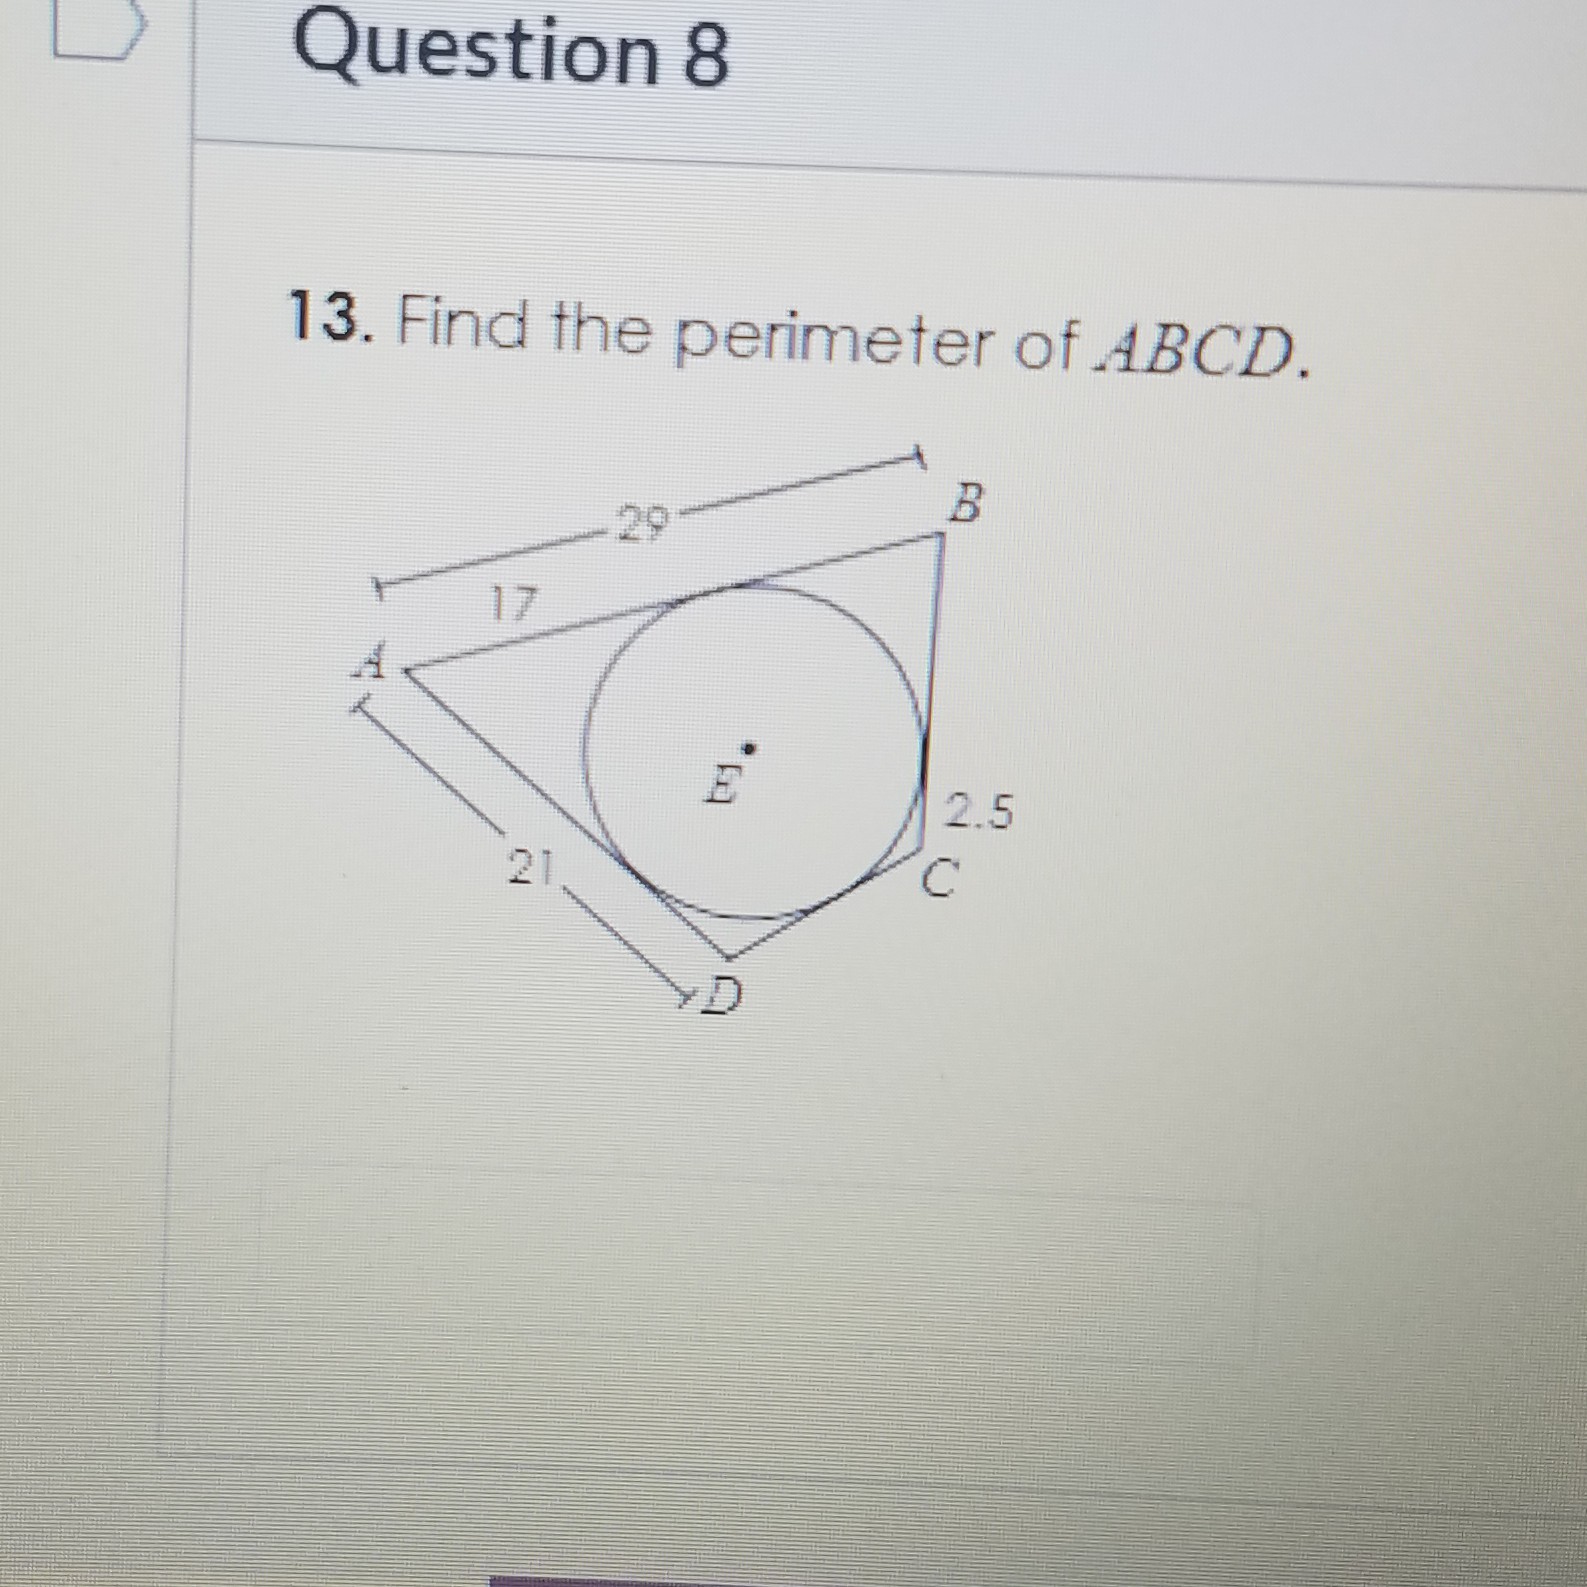 Question 8
13. Find the perimeter of \( A B C D \).